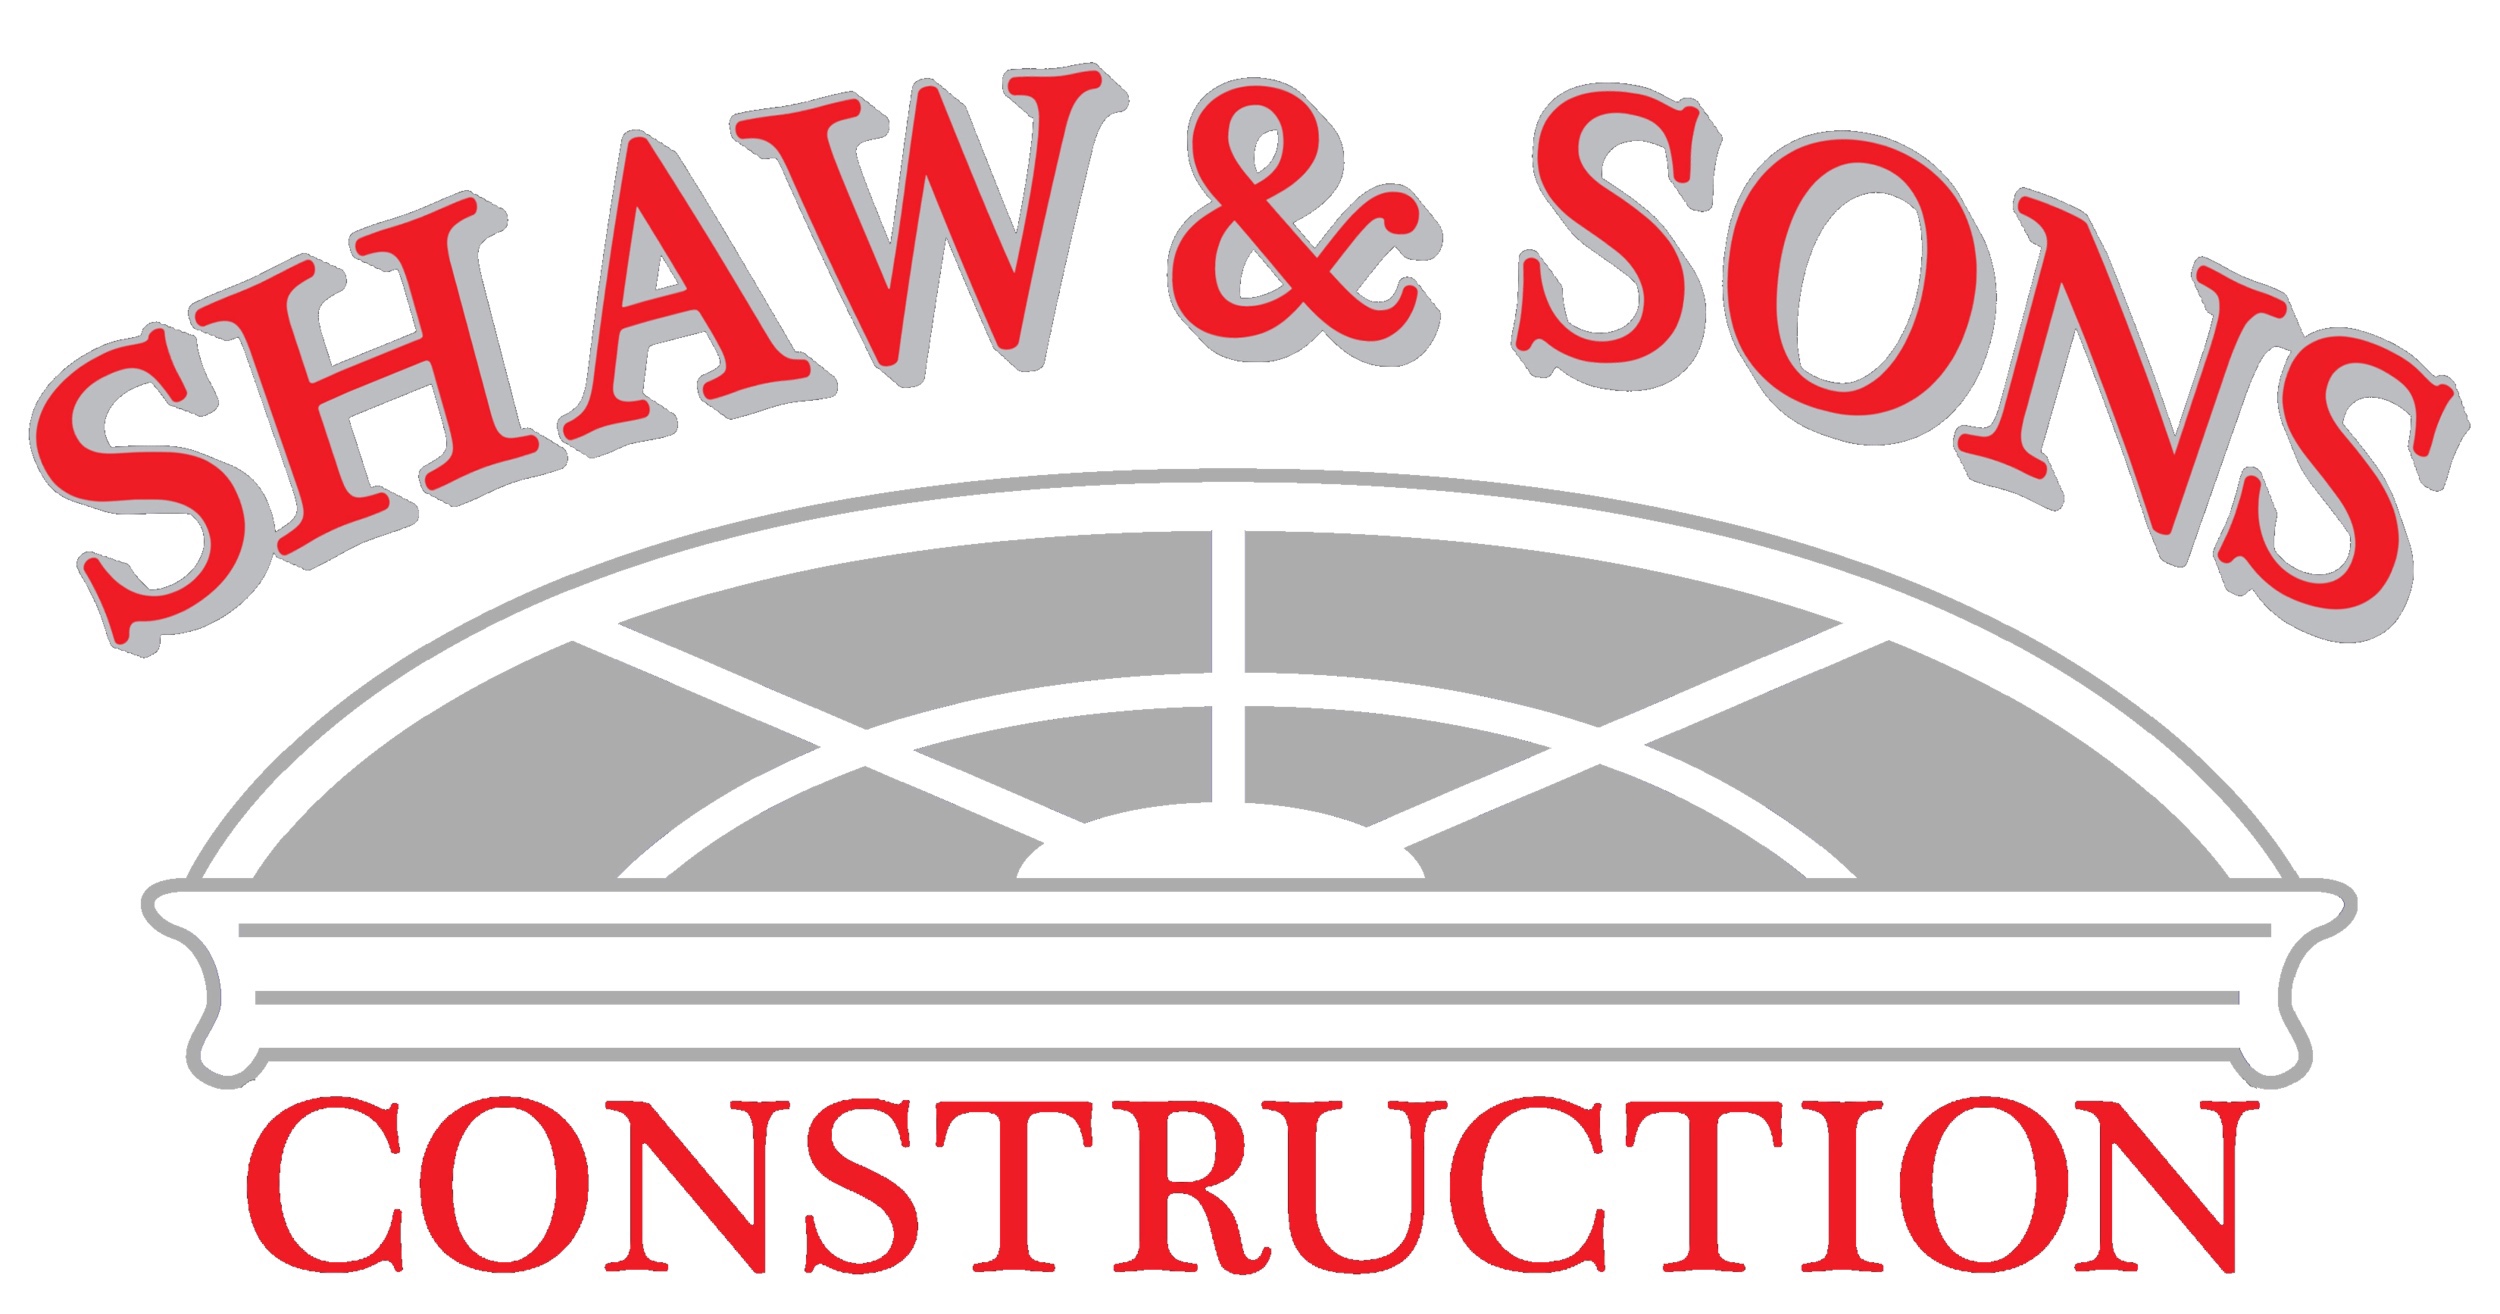 Fred Shaw &amp; Sons Construction